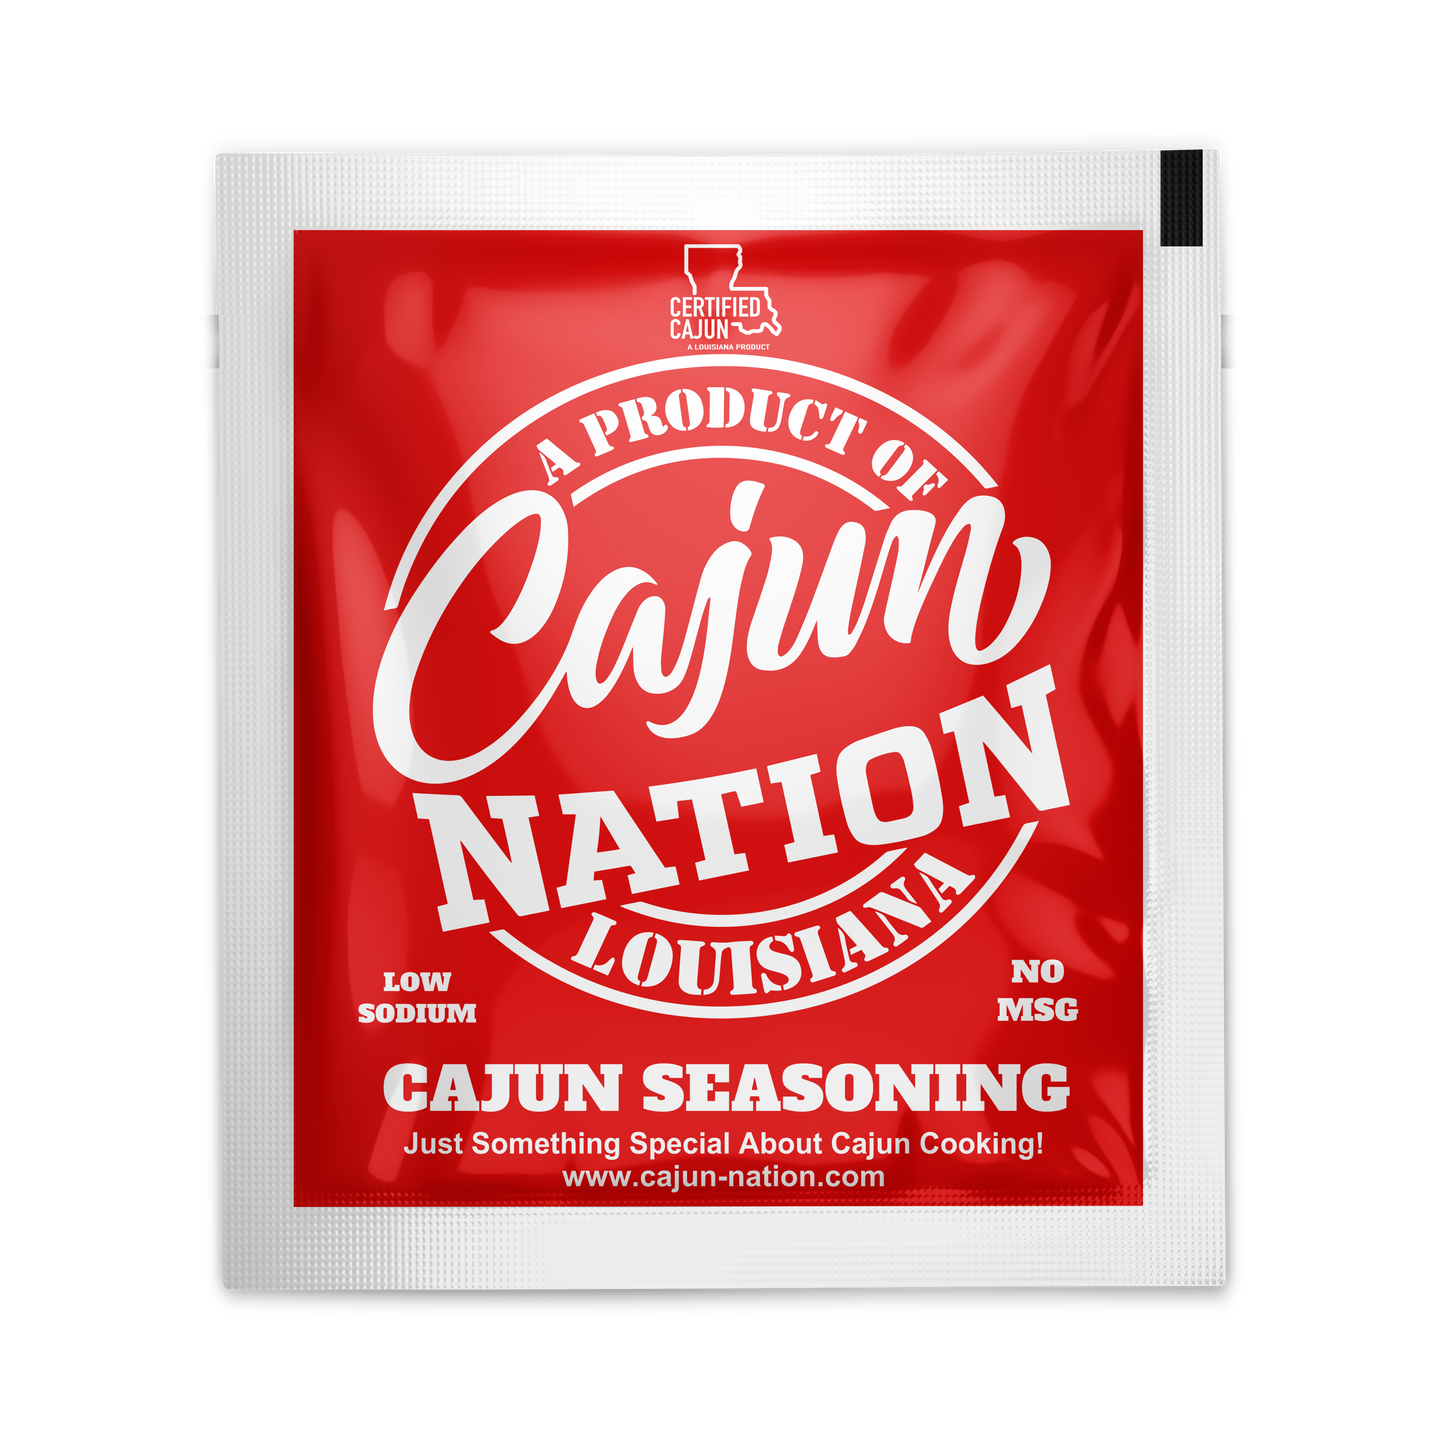 Cajun Nation Cajun Seasoning Packets are a Certified Cajun LOW SODIUM flavorful blend of nature Cajun Spices with No MSG and Gluten Free.  Blended in Cajun Nation along the Cajun Coast in Southwest Louisiana.